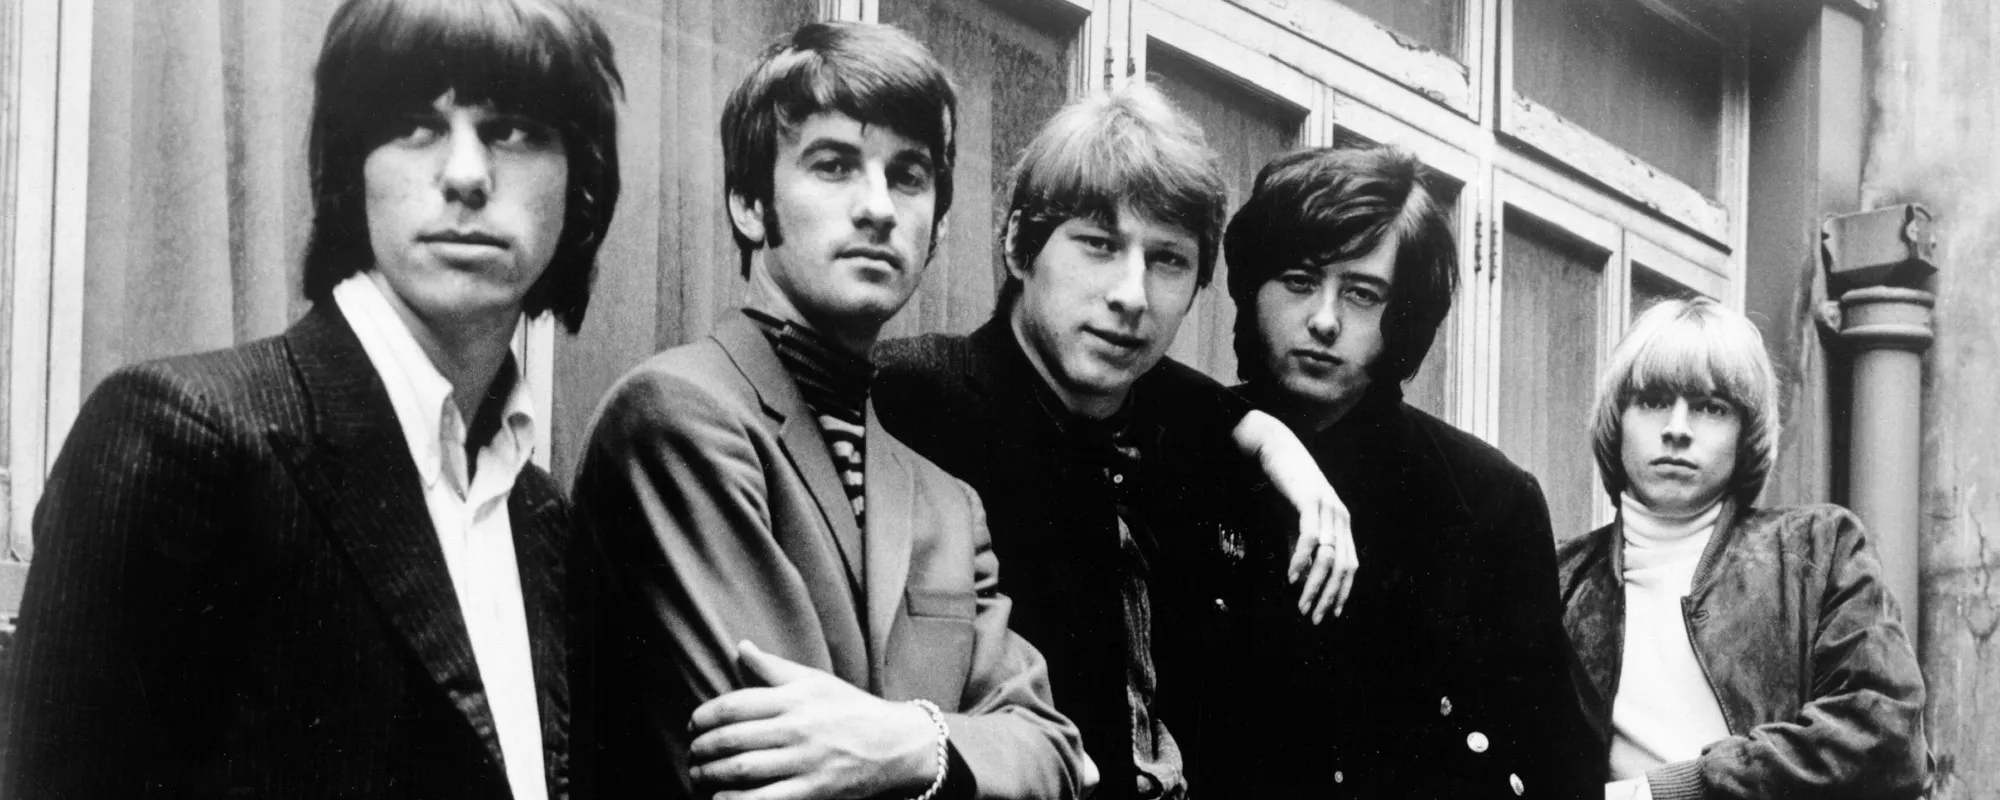 How “Shapes of Things” by The Yardbirds Helped Set a Standard for Other Guitar-Driven Bands